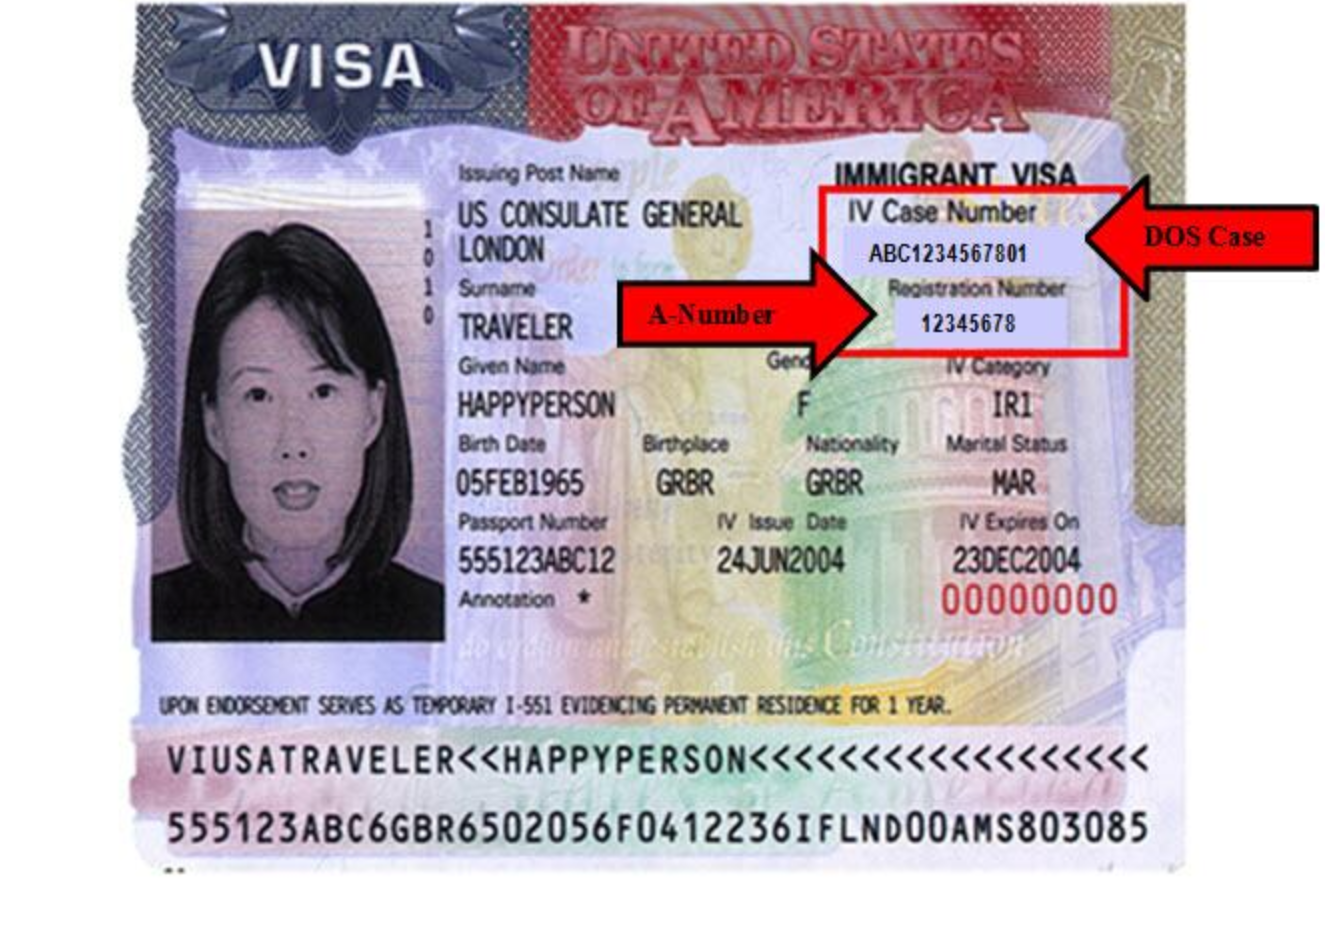 Alien Registration Number, Explained - What Is a USCIS 'A ...